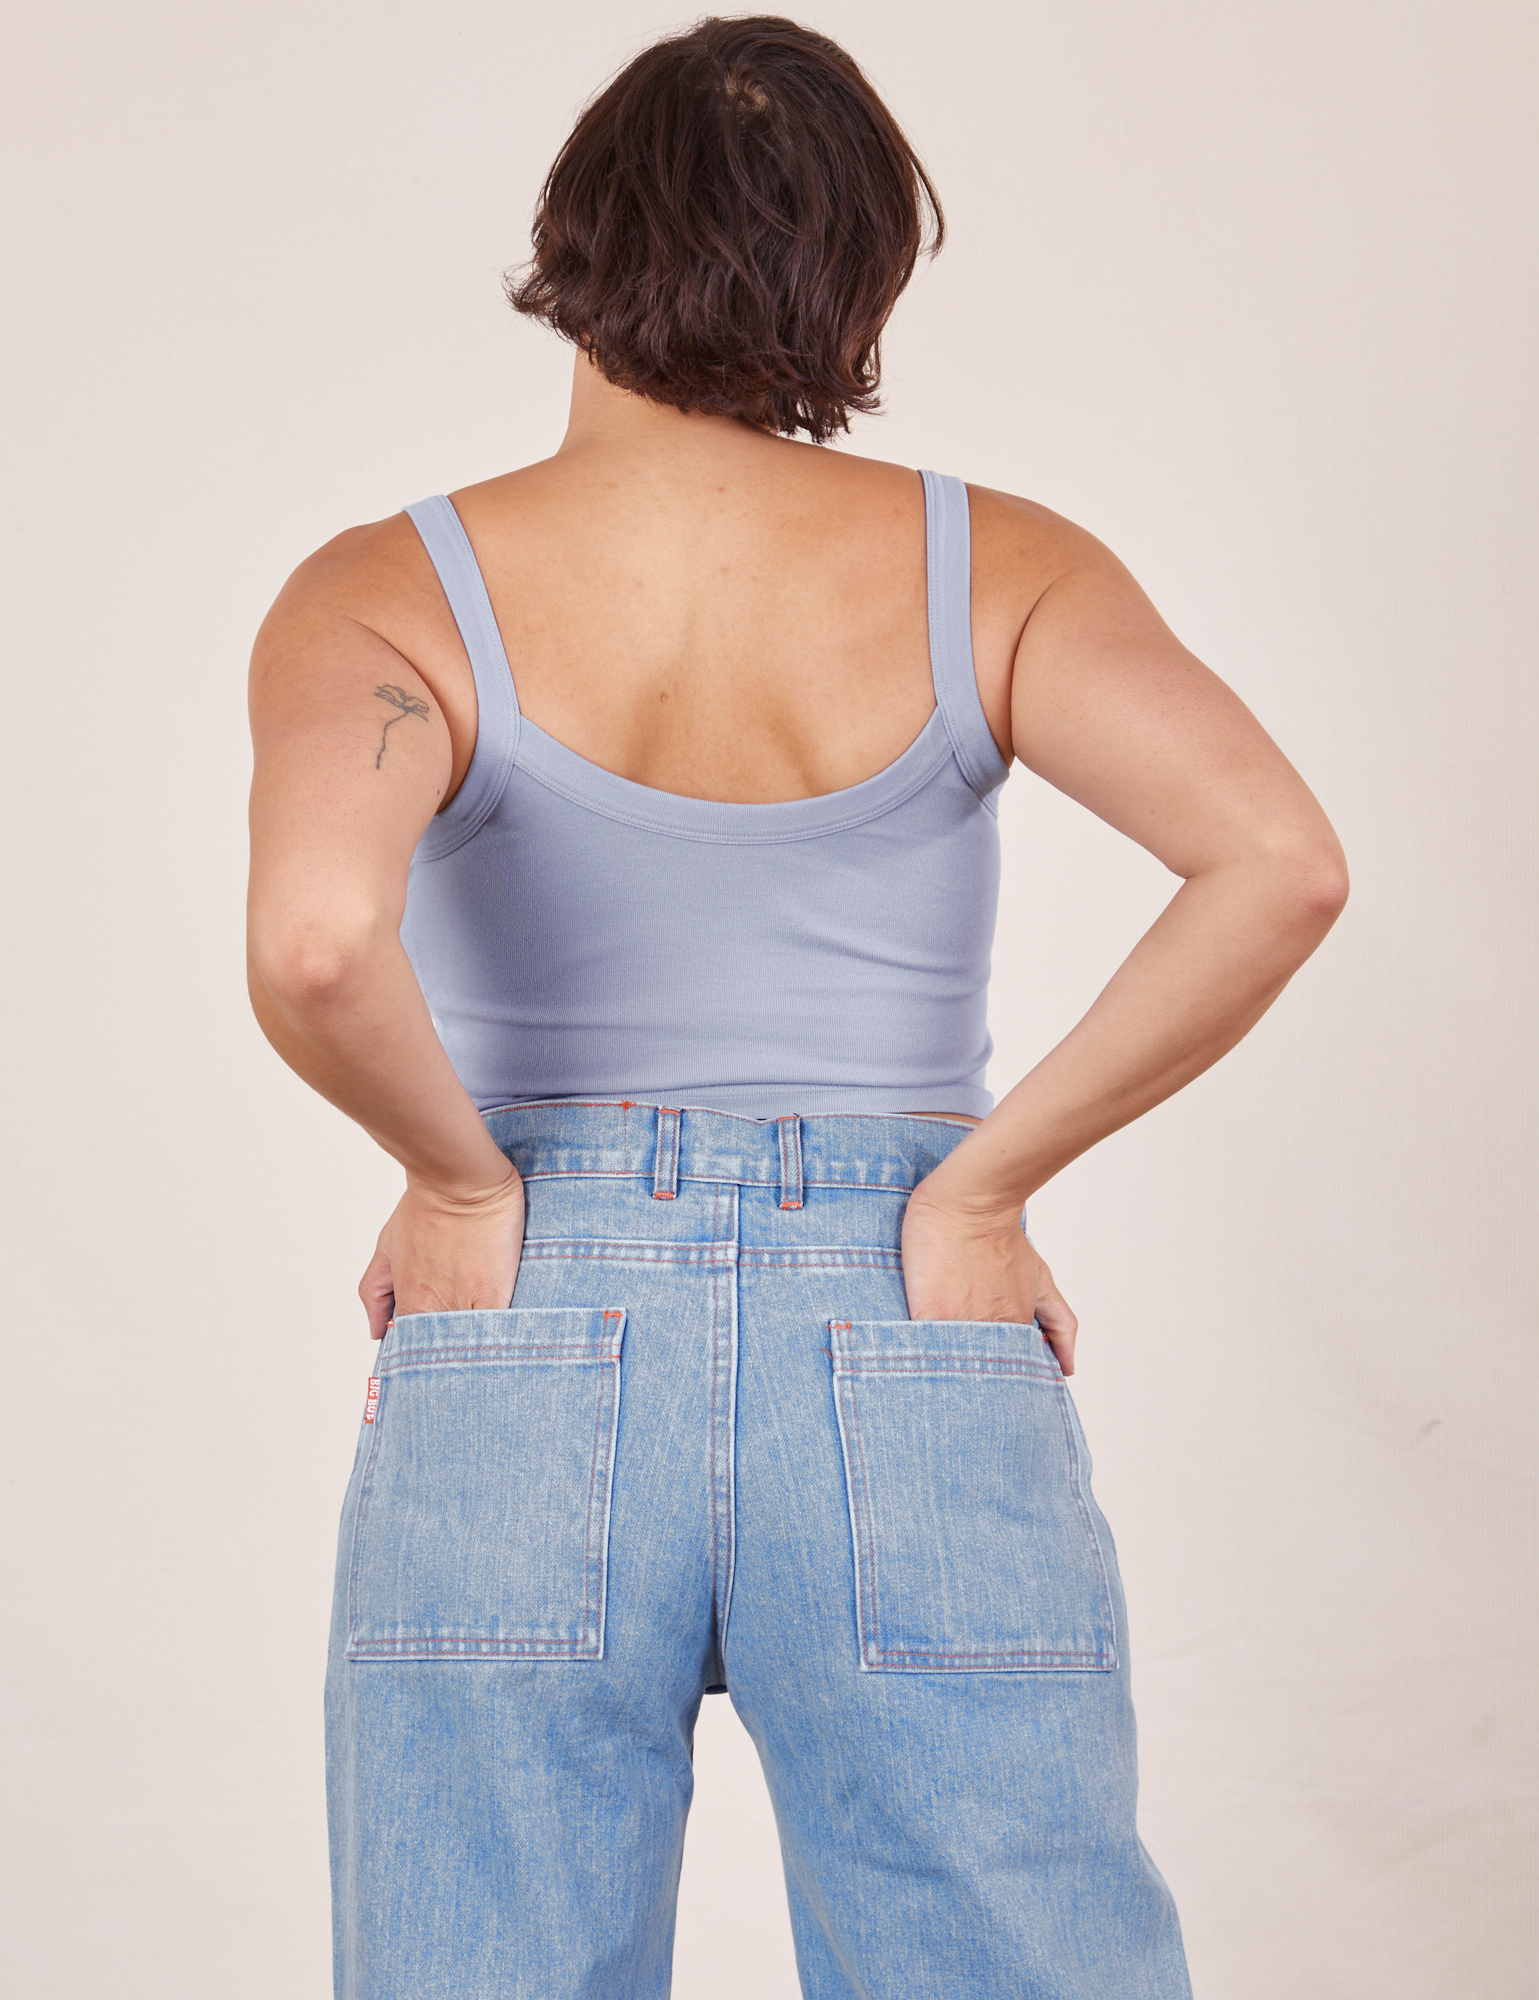 Back view of Cropped Cami in Periwinkle and light wash Sailor Jeans worn by Tiara. She has both hands in the back pant pockets.